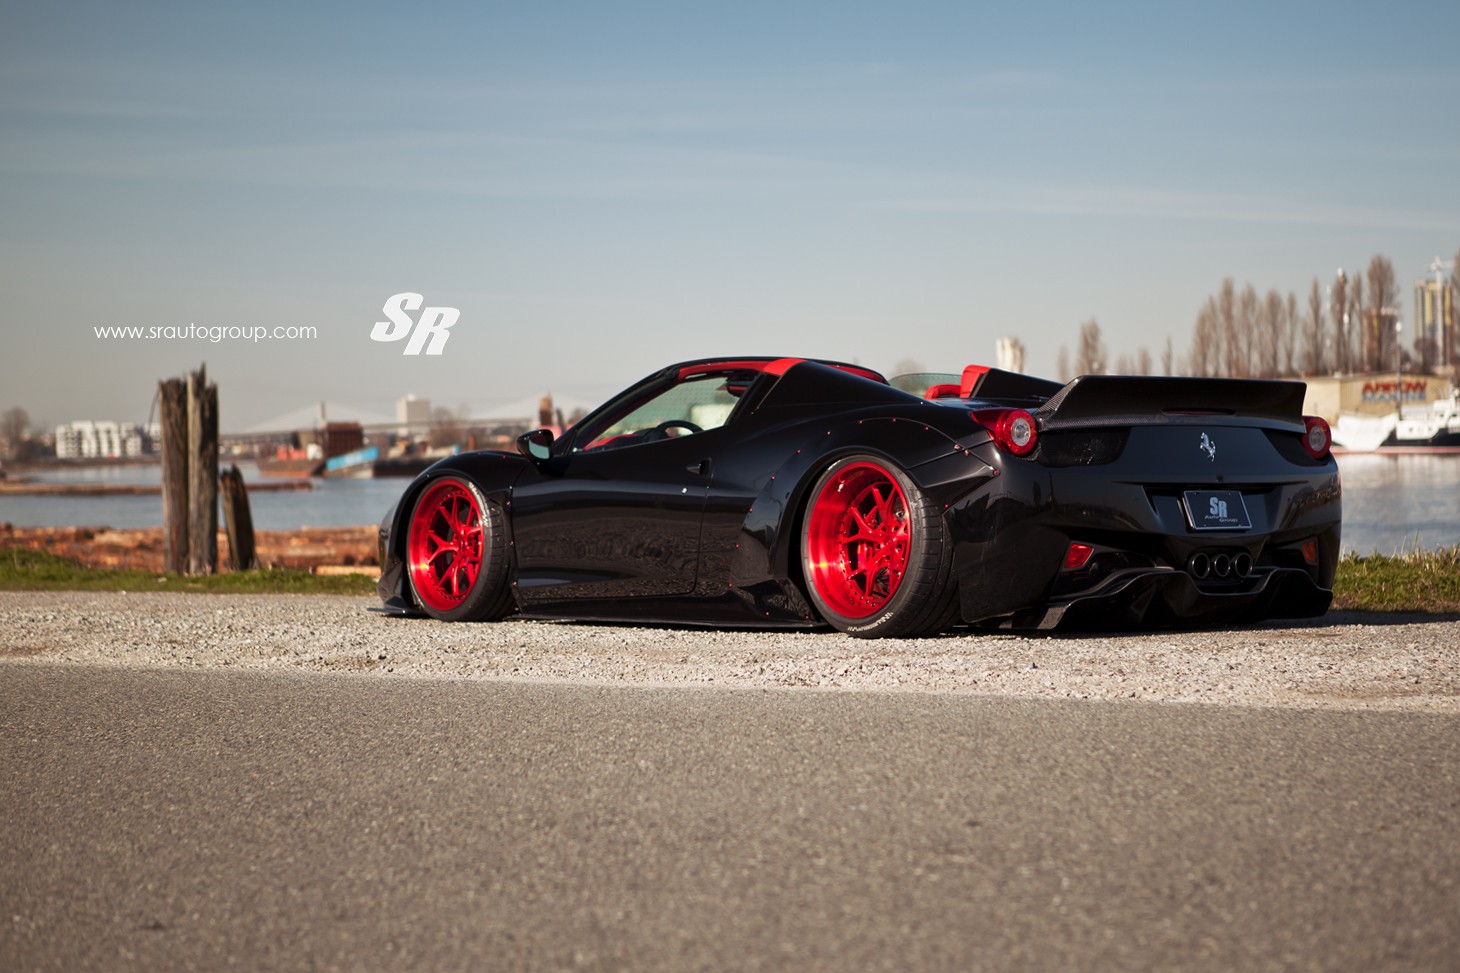 ferrari-458-spider-with-liberty-walk-kit-is-total-eye-candy-photo-gallery_21.jpg